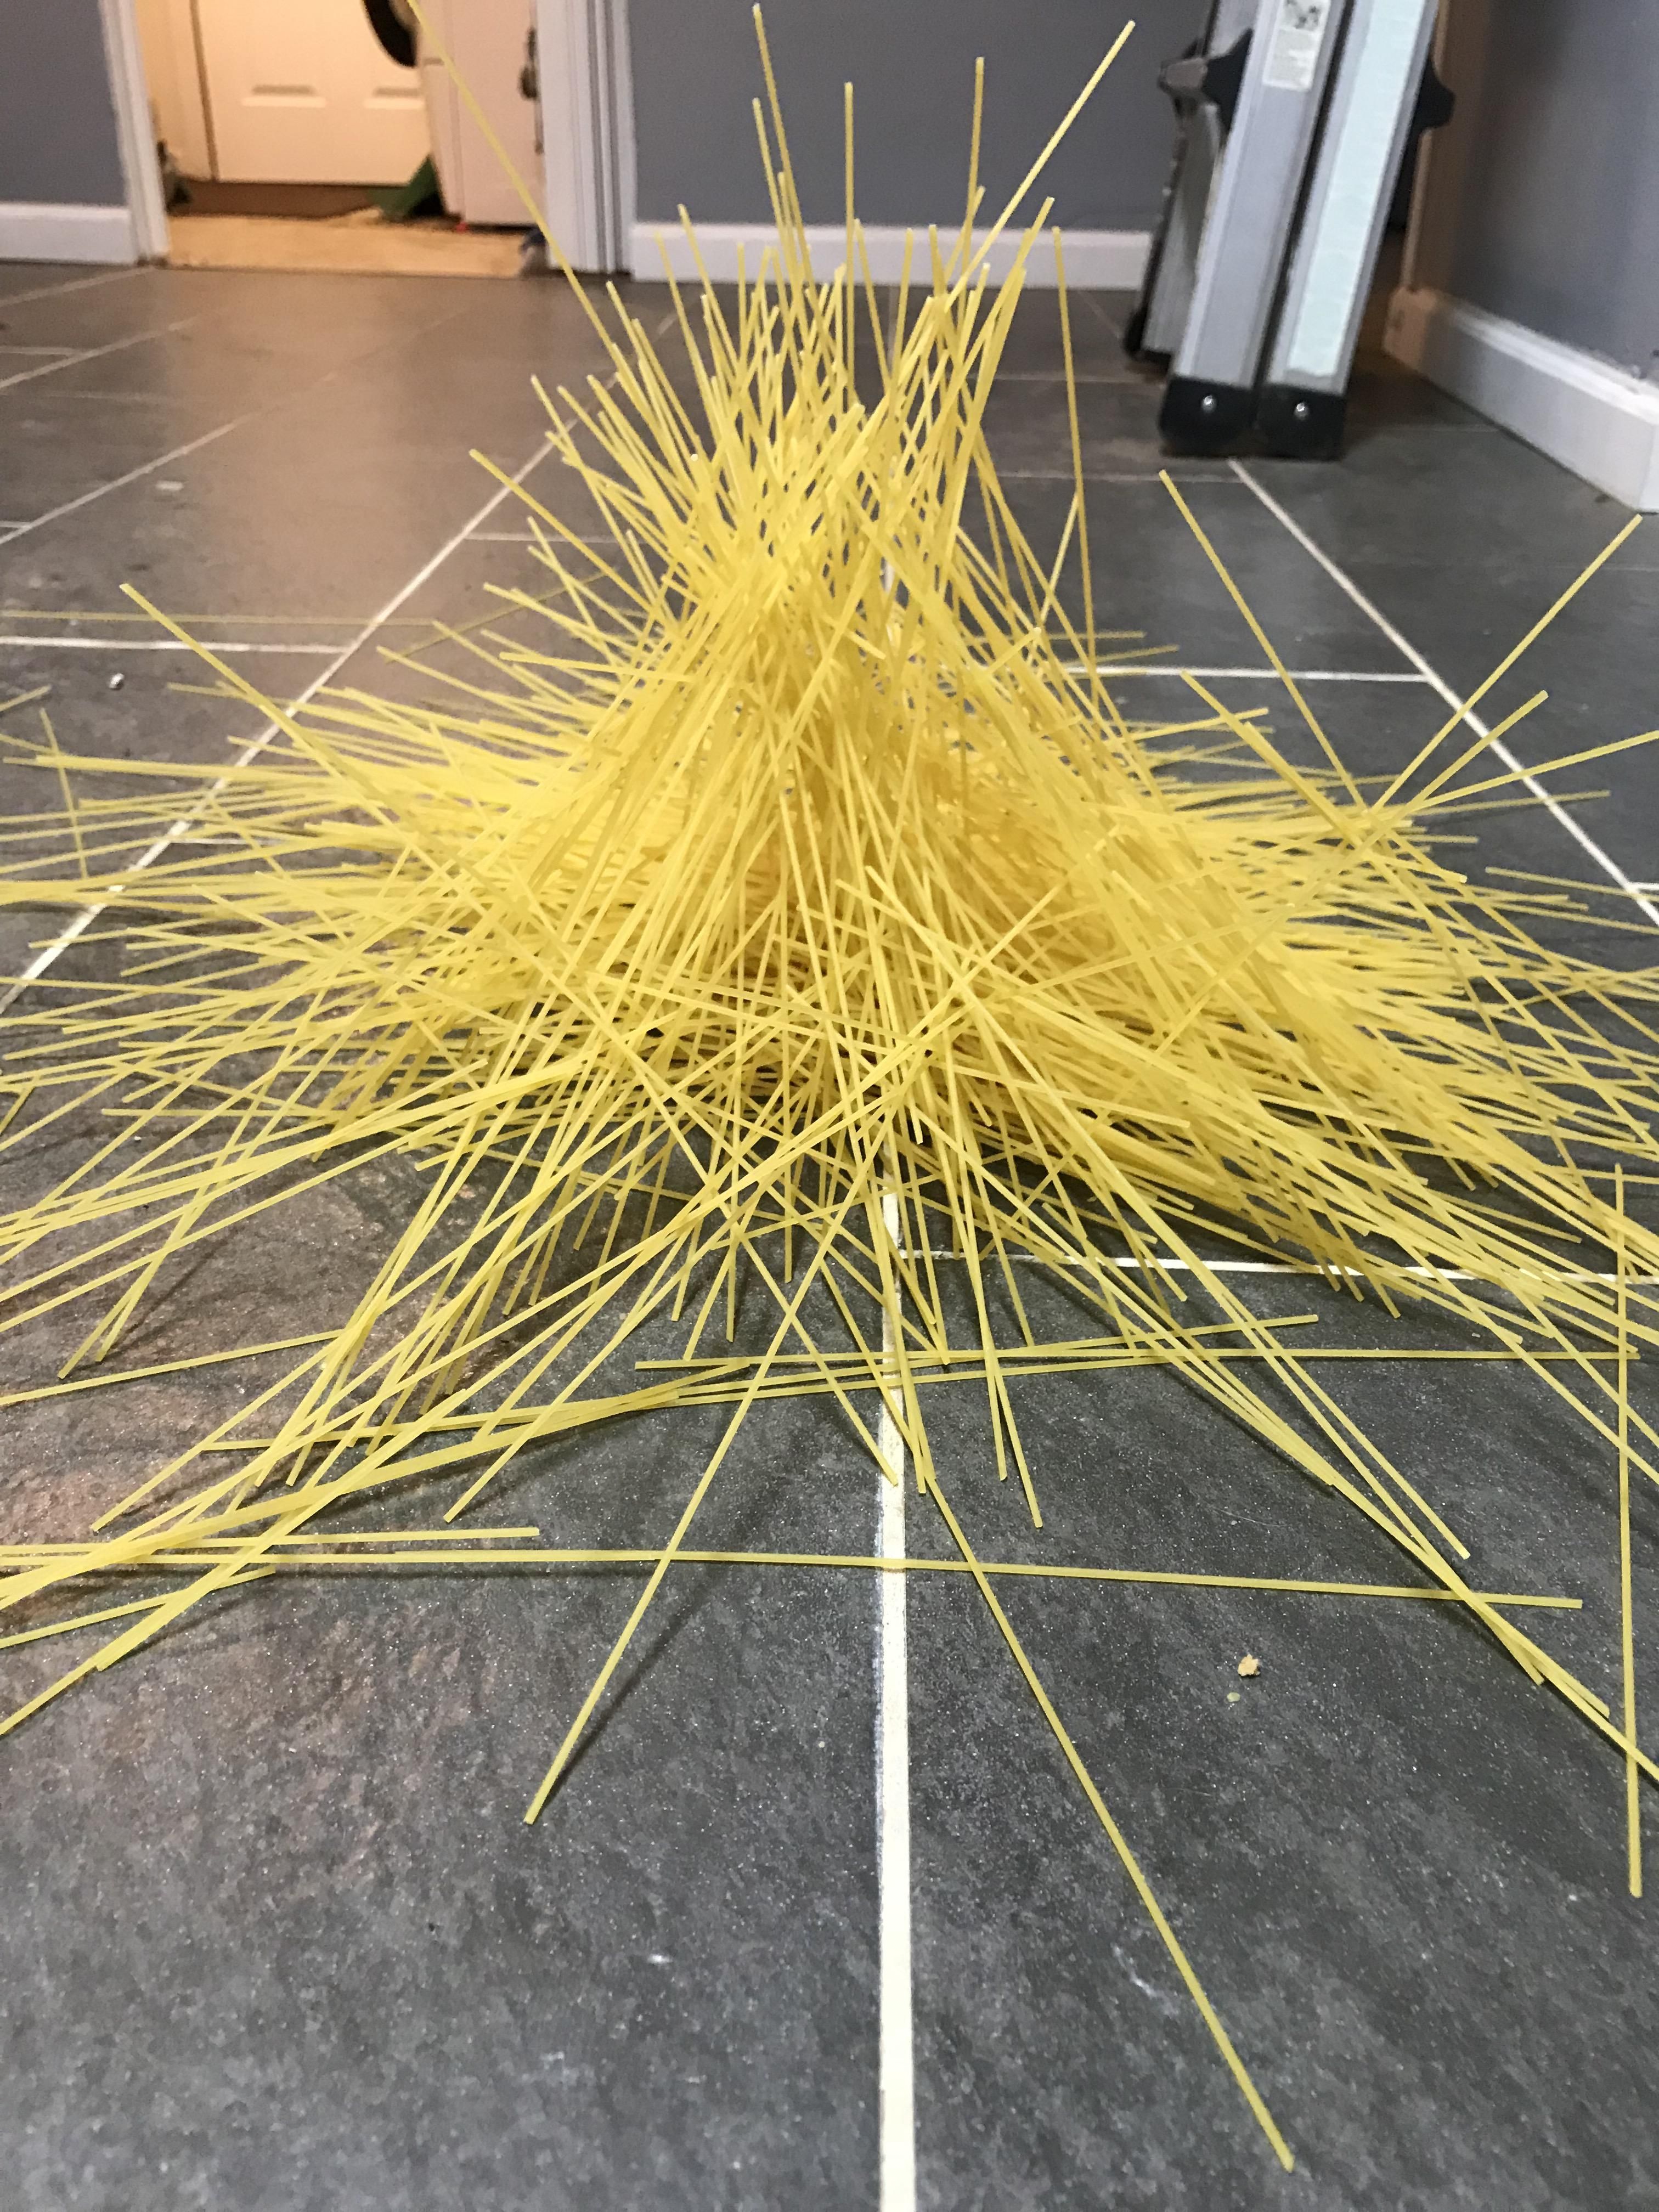 I dropped a box of spaghetti on the ground and accidentally graduated from Art School.